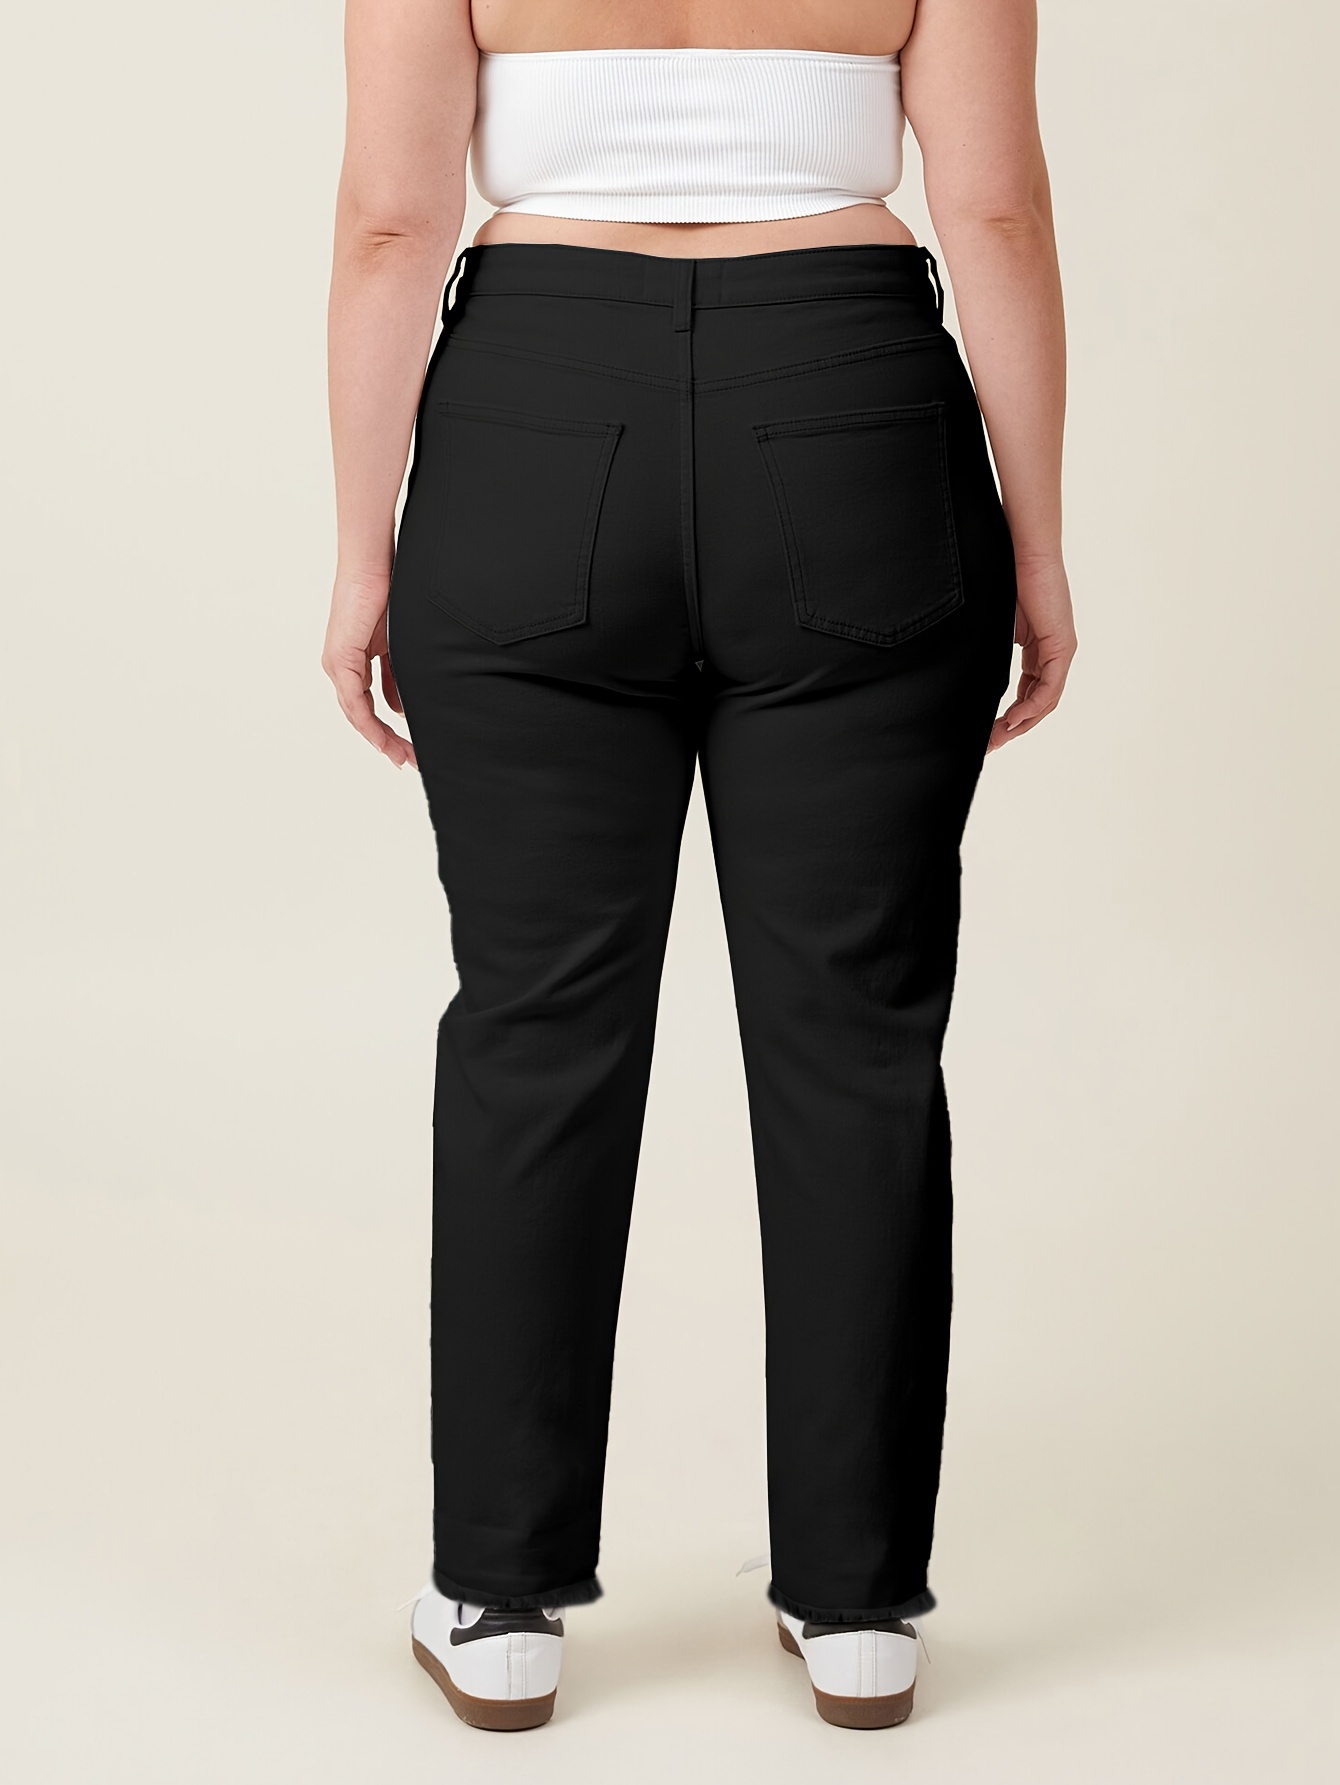 Women's Plus Size Trousers & Jeans, Casual & Formal, Phase Eight